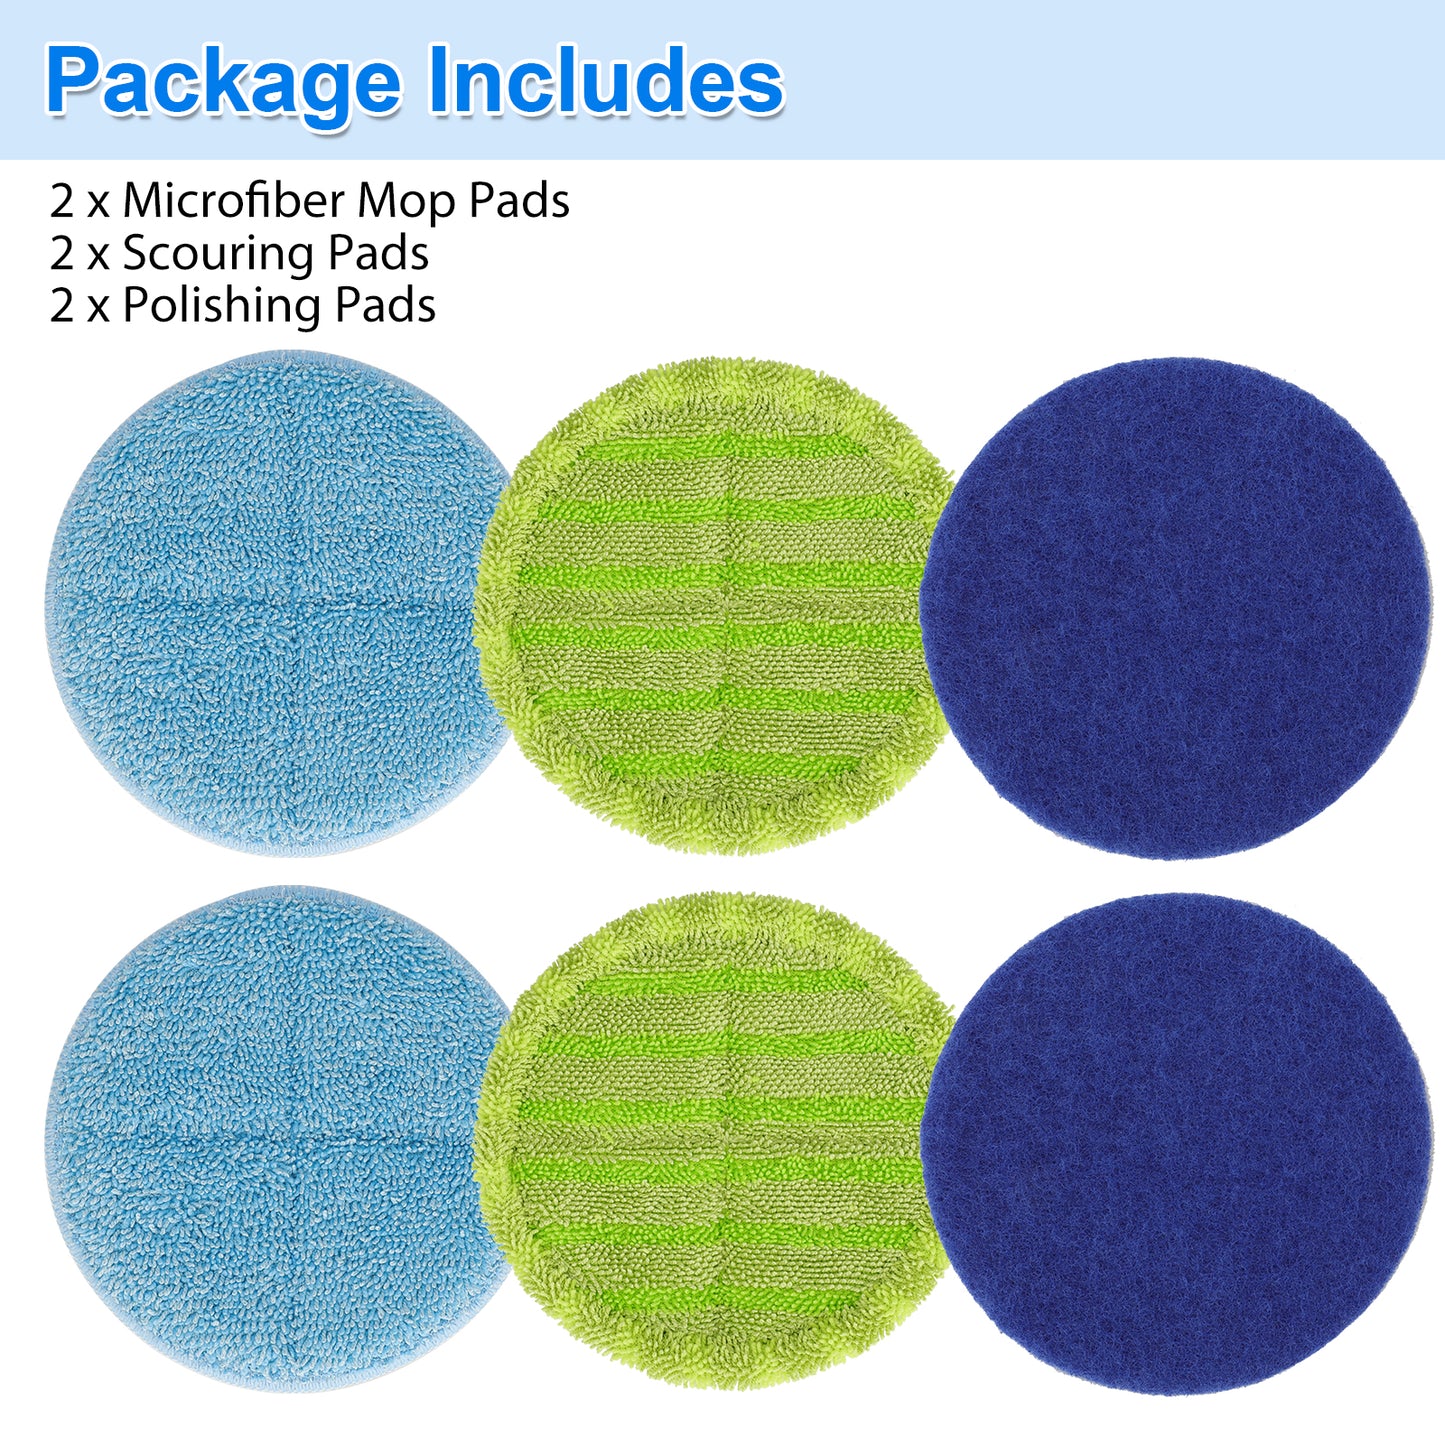 REPLACEMENT STEAM MOP PADS - 6 PACK OF REGULAR SCRUBBY, HEAVY SCRUB, AND TWIST CLOTH PADS